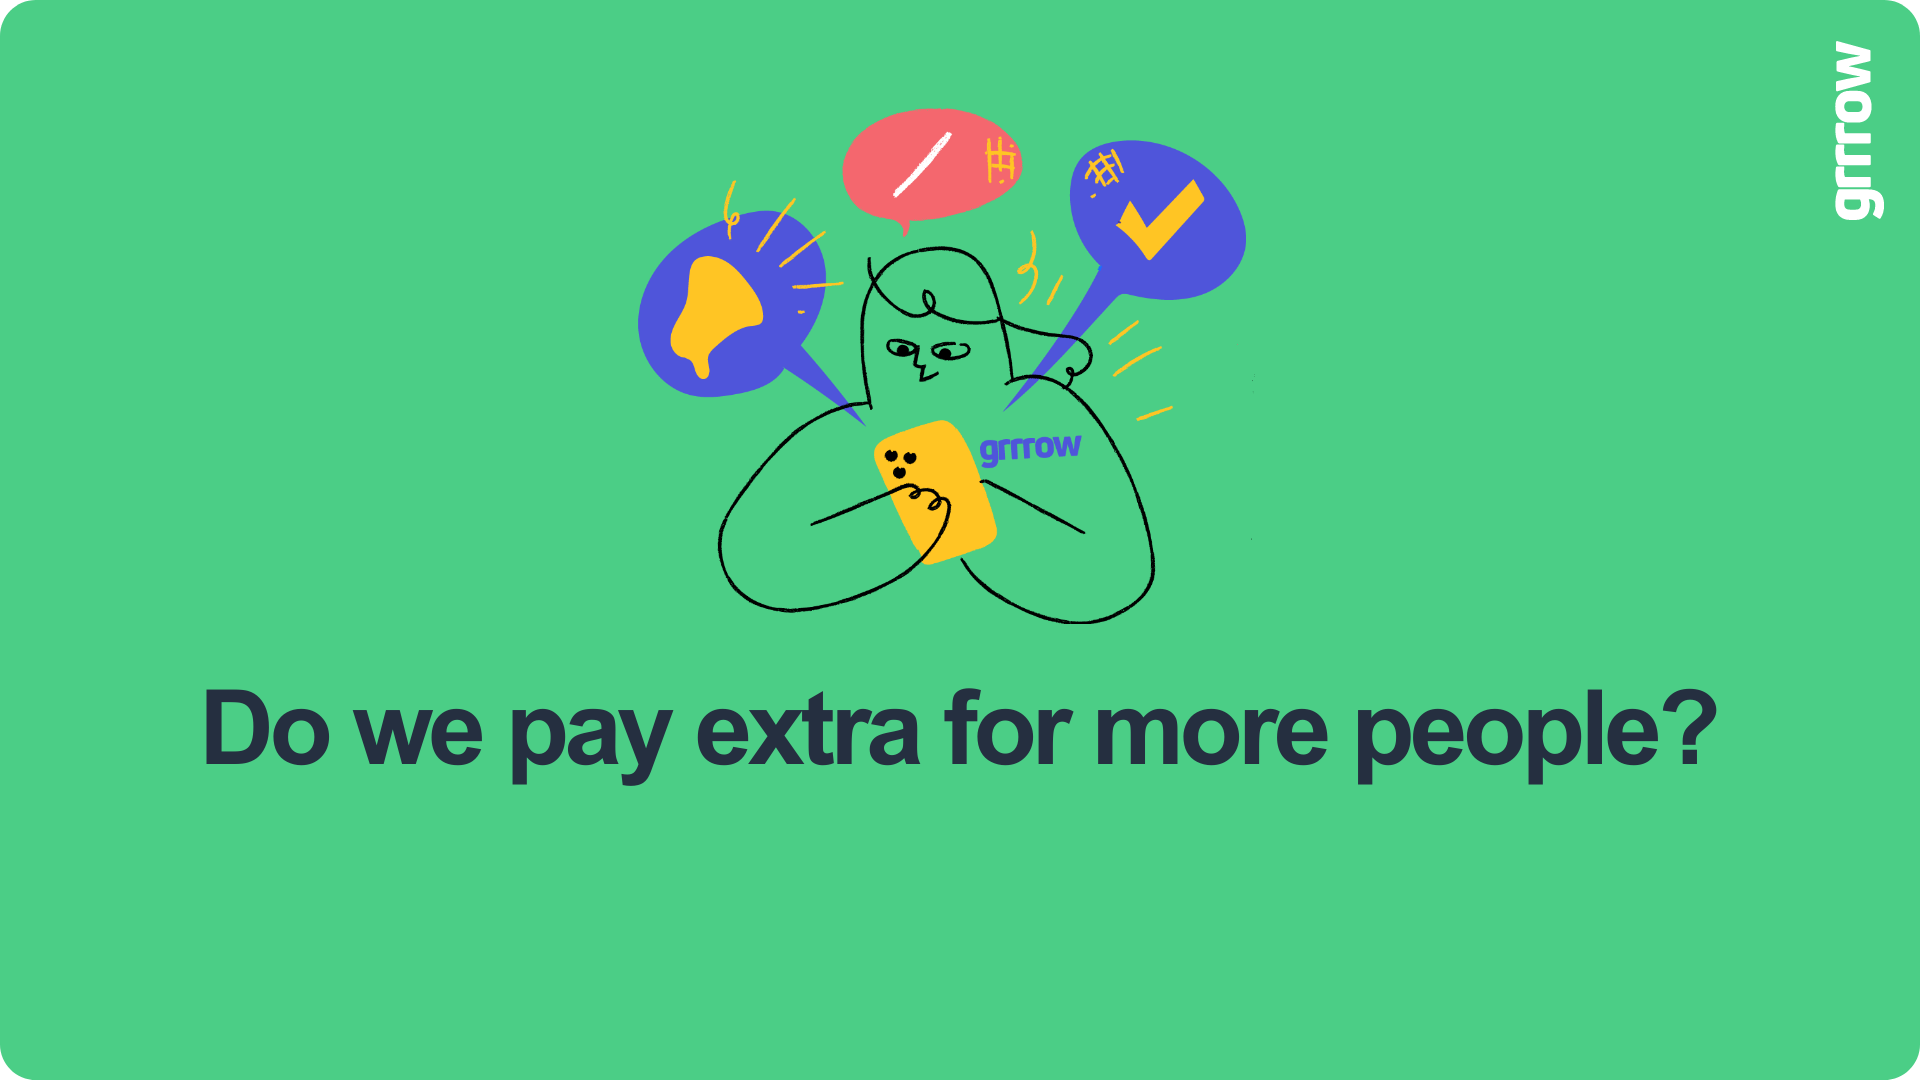 Do we pay extra for more people?